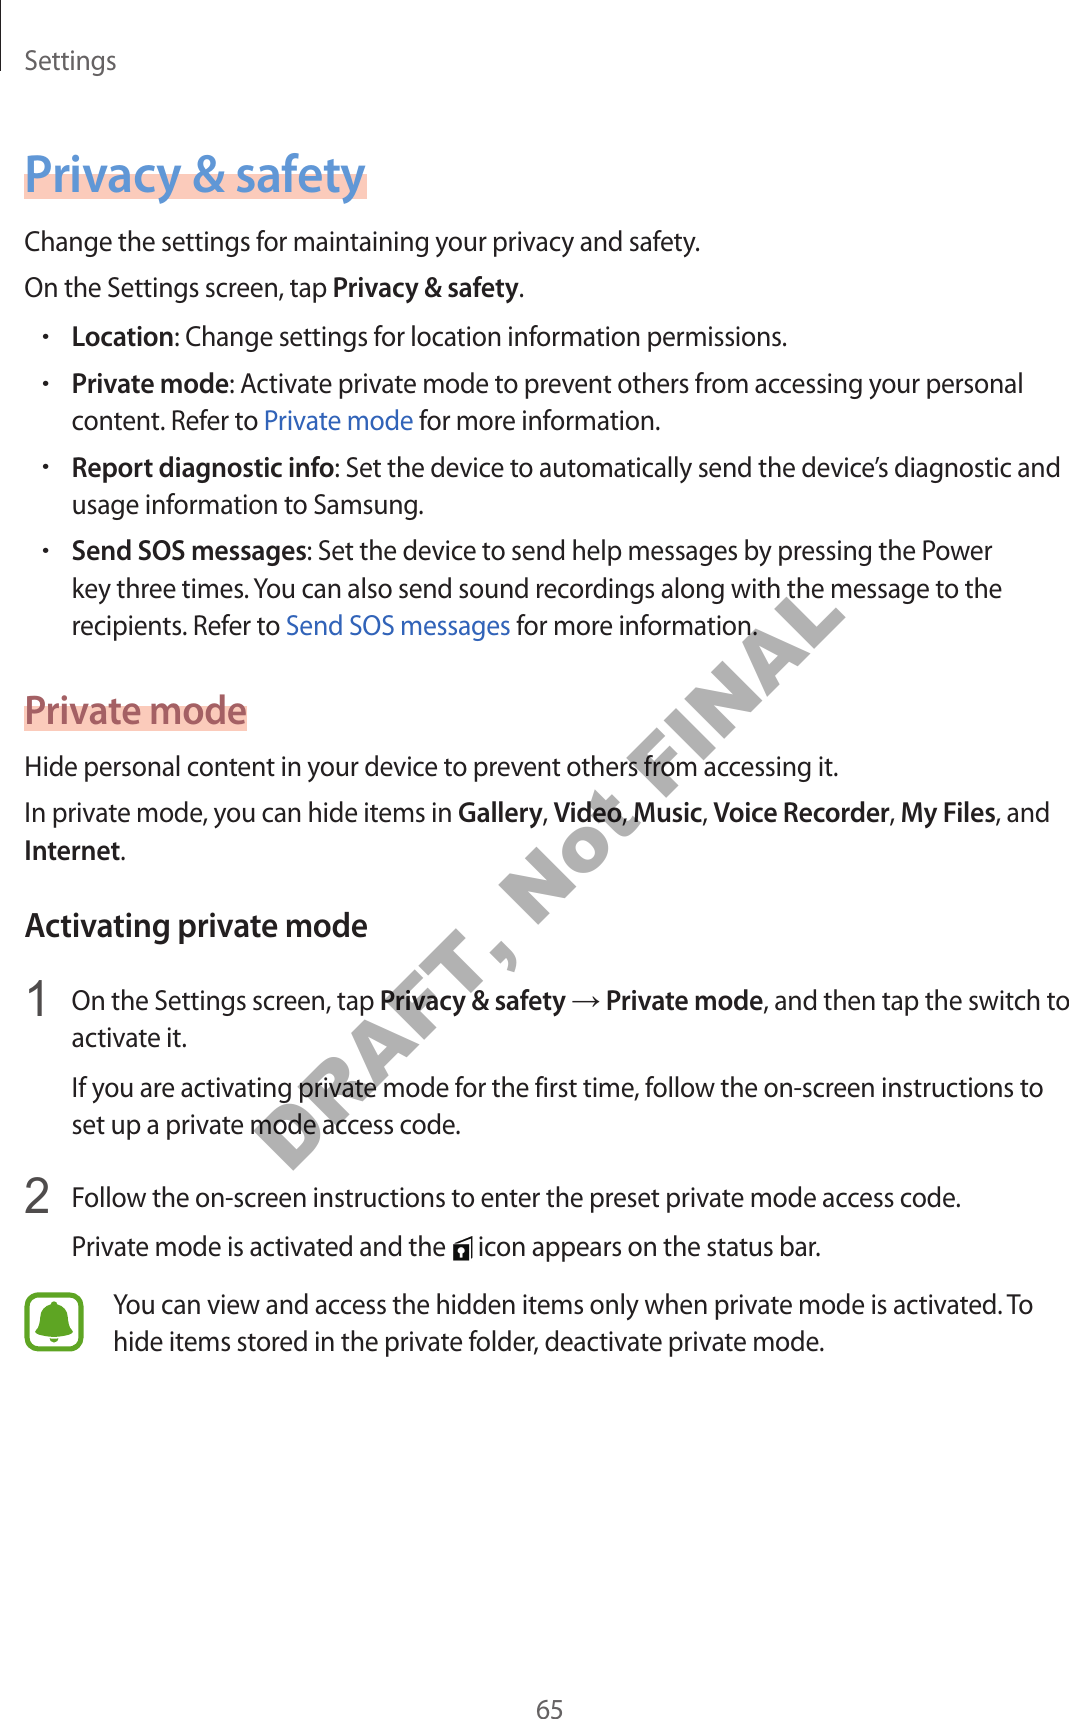 Settings65P rivacy &amp; safetyChange the settings for maintaining y our privacy and safety.On the Settings screen, tap Priv acy &amp; safety.•Location: Change settings for location information permissions.•Priv at e mode: Activate privat e mode t o pr ev ent others fr om ac cessing y our personal conten t. Ref er t o P riva te mode f or mor e information.•Report diagnostic info: Set the device to automatically send the devic e’s diagnostic and usage information t o Samsung .•Send SOS messages: Set the device to send help messages by pr essing the Power key three times . You can also send sound recordings along with the message t o the recipients . Ref er t o Send SOS messages for mor e information.Priv a te modeHide personal content in y our device t o pr ev ent others fr om ac c essing it.In private mode, y ou can hide it ems in Gallery, Video, Music, Voice Recor der, My F iles, and Internet.Activating priv at e mode1  On the Settings screen, tap Priv acy &amp; safety → Priv at e mode, and then tap the switch to activate it.If you are activating private mode for the first time, follo w the on-scr een instructions to set up a private mode acc ess c ode .2  Follow the on-screen instructions to enter the pr eset privat e mode ac cess c ode .Priva te mode is activated and the   icon appears on the status bar.You can view and access the hidden items only when private mode is activated . To hide items stor ed in the privat e f older, deactivate private mode .DRAFT, Not FINAL